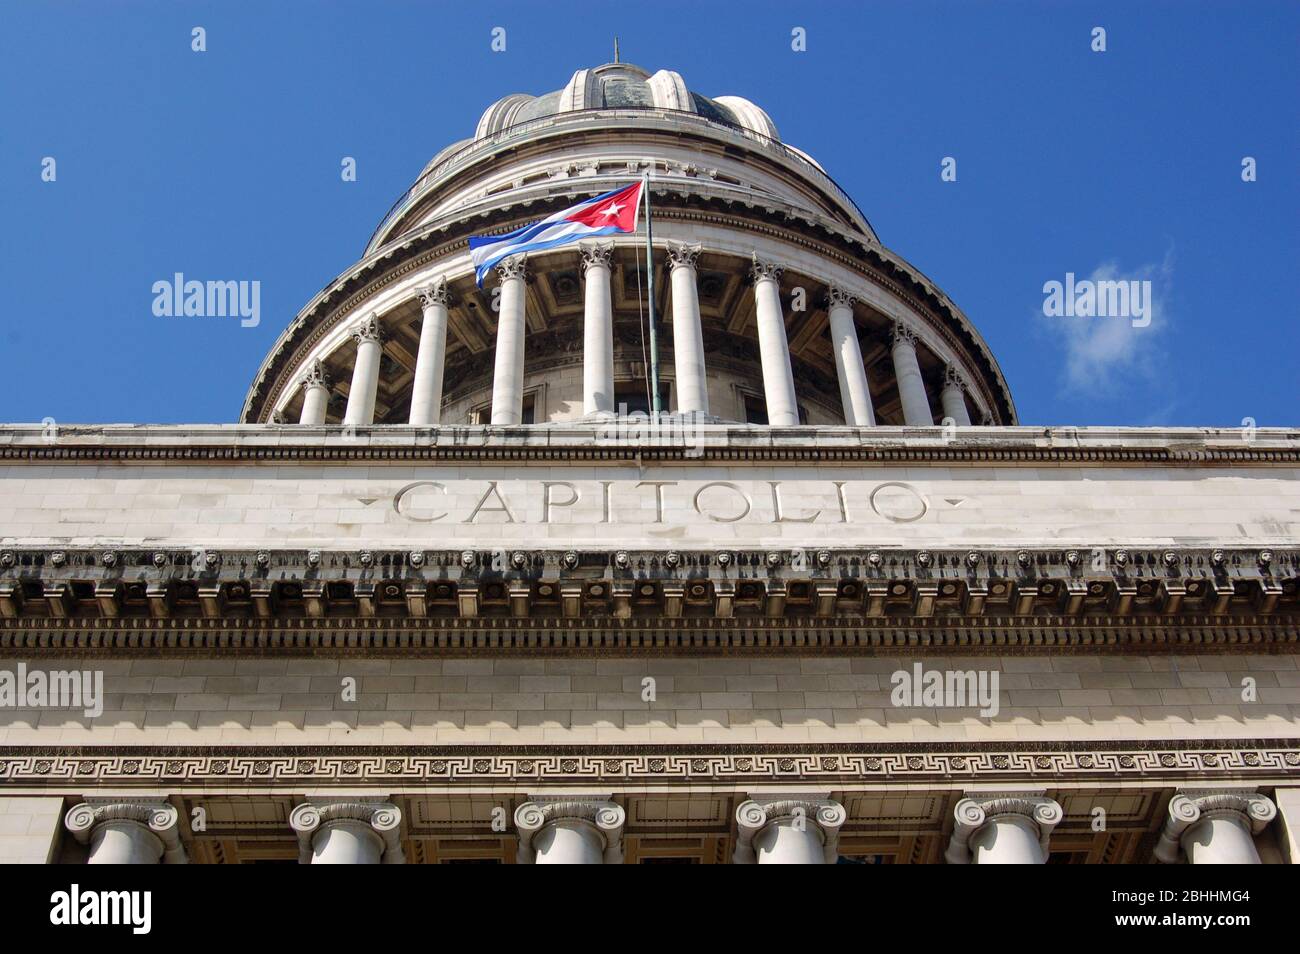 View looking up towards the dome of Havana's Capitolio building which houses Cuba's legislature. Stock Photo